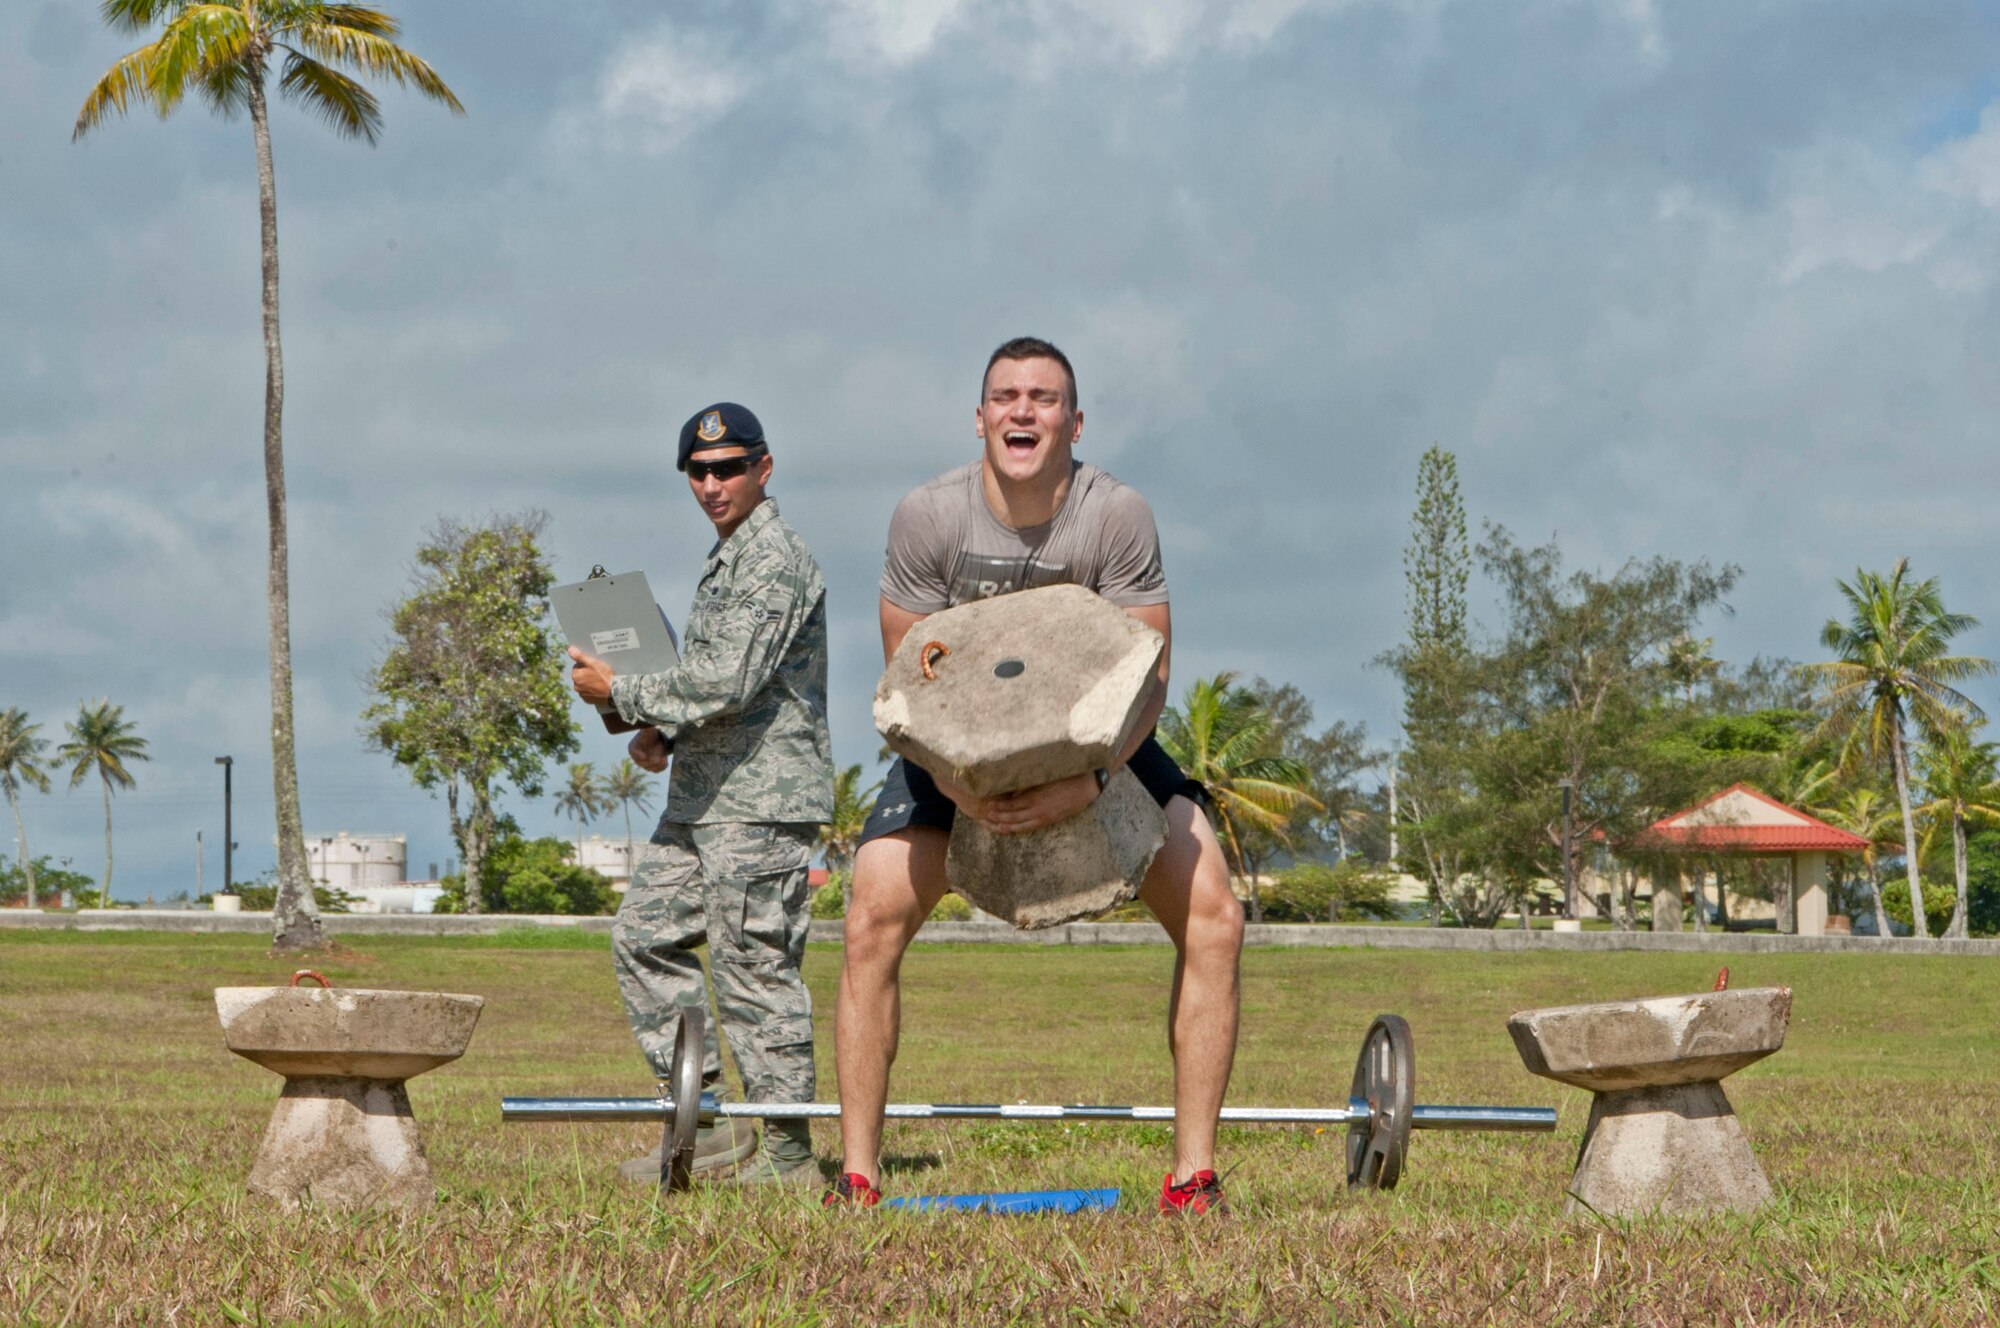 Airman 1st Class Cody Rother, 36th Security Forces Squadron patrolman, lifts a cement block during the Strongman Competition at Andersen Air Force Base, Guam, May 15, 2013. The Strongman Competition was held in honor of National Police Week which occurs each year during the week of May 15 in recognition of the service and sacrifice of members of U.S. law enforcement agencies. (U.S. Air Force photo by Airman 1st Class Adarius Petty/Released)